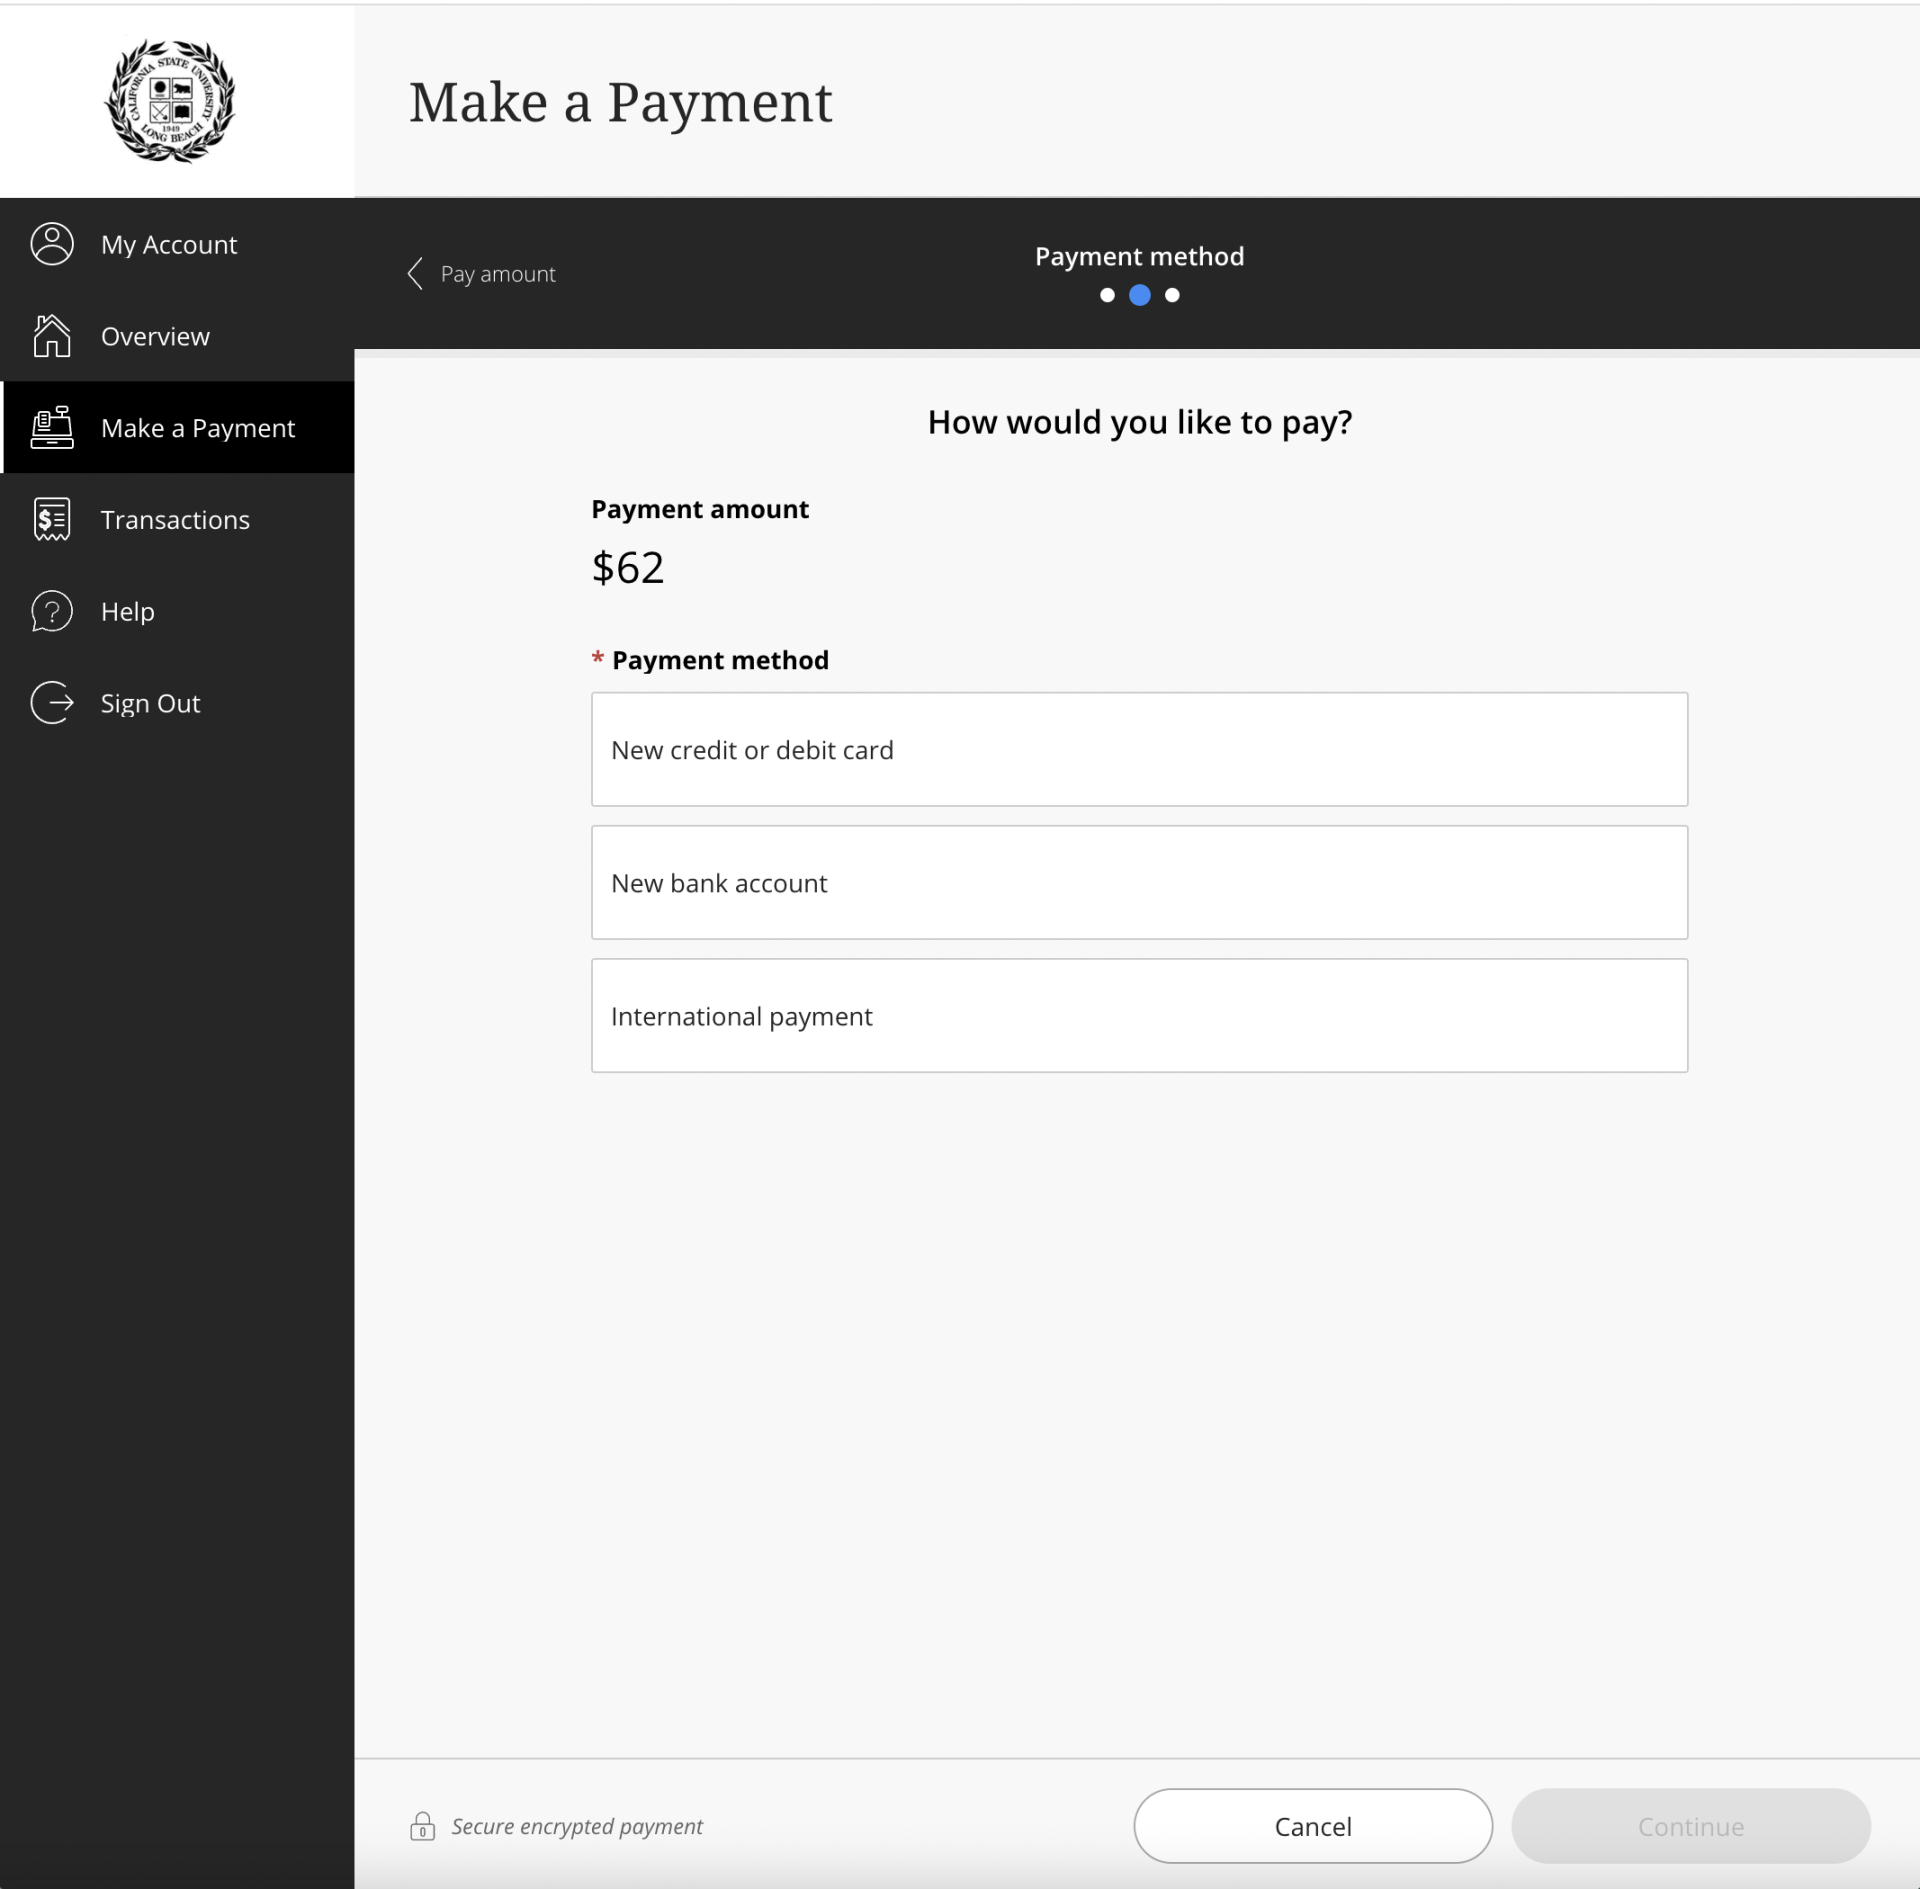 Screenshot of Payment method window with options